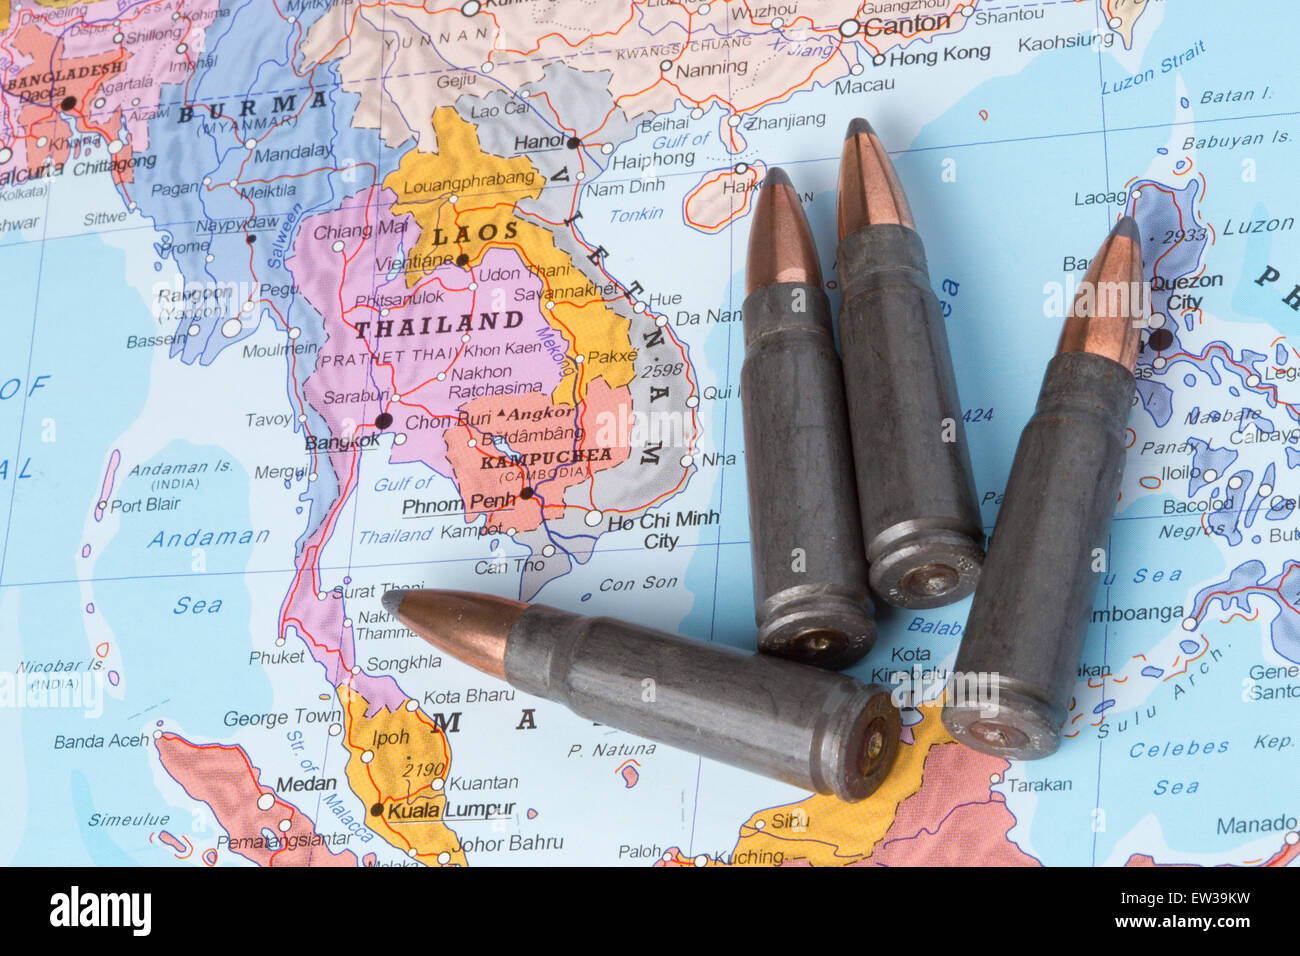 Four bullets on the geographical map of Thailand, Laos and Vietnam. Conceptual image for war, conflict, violence. Stock Photo